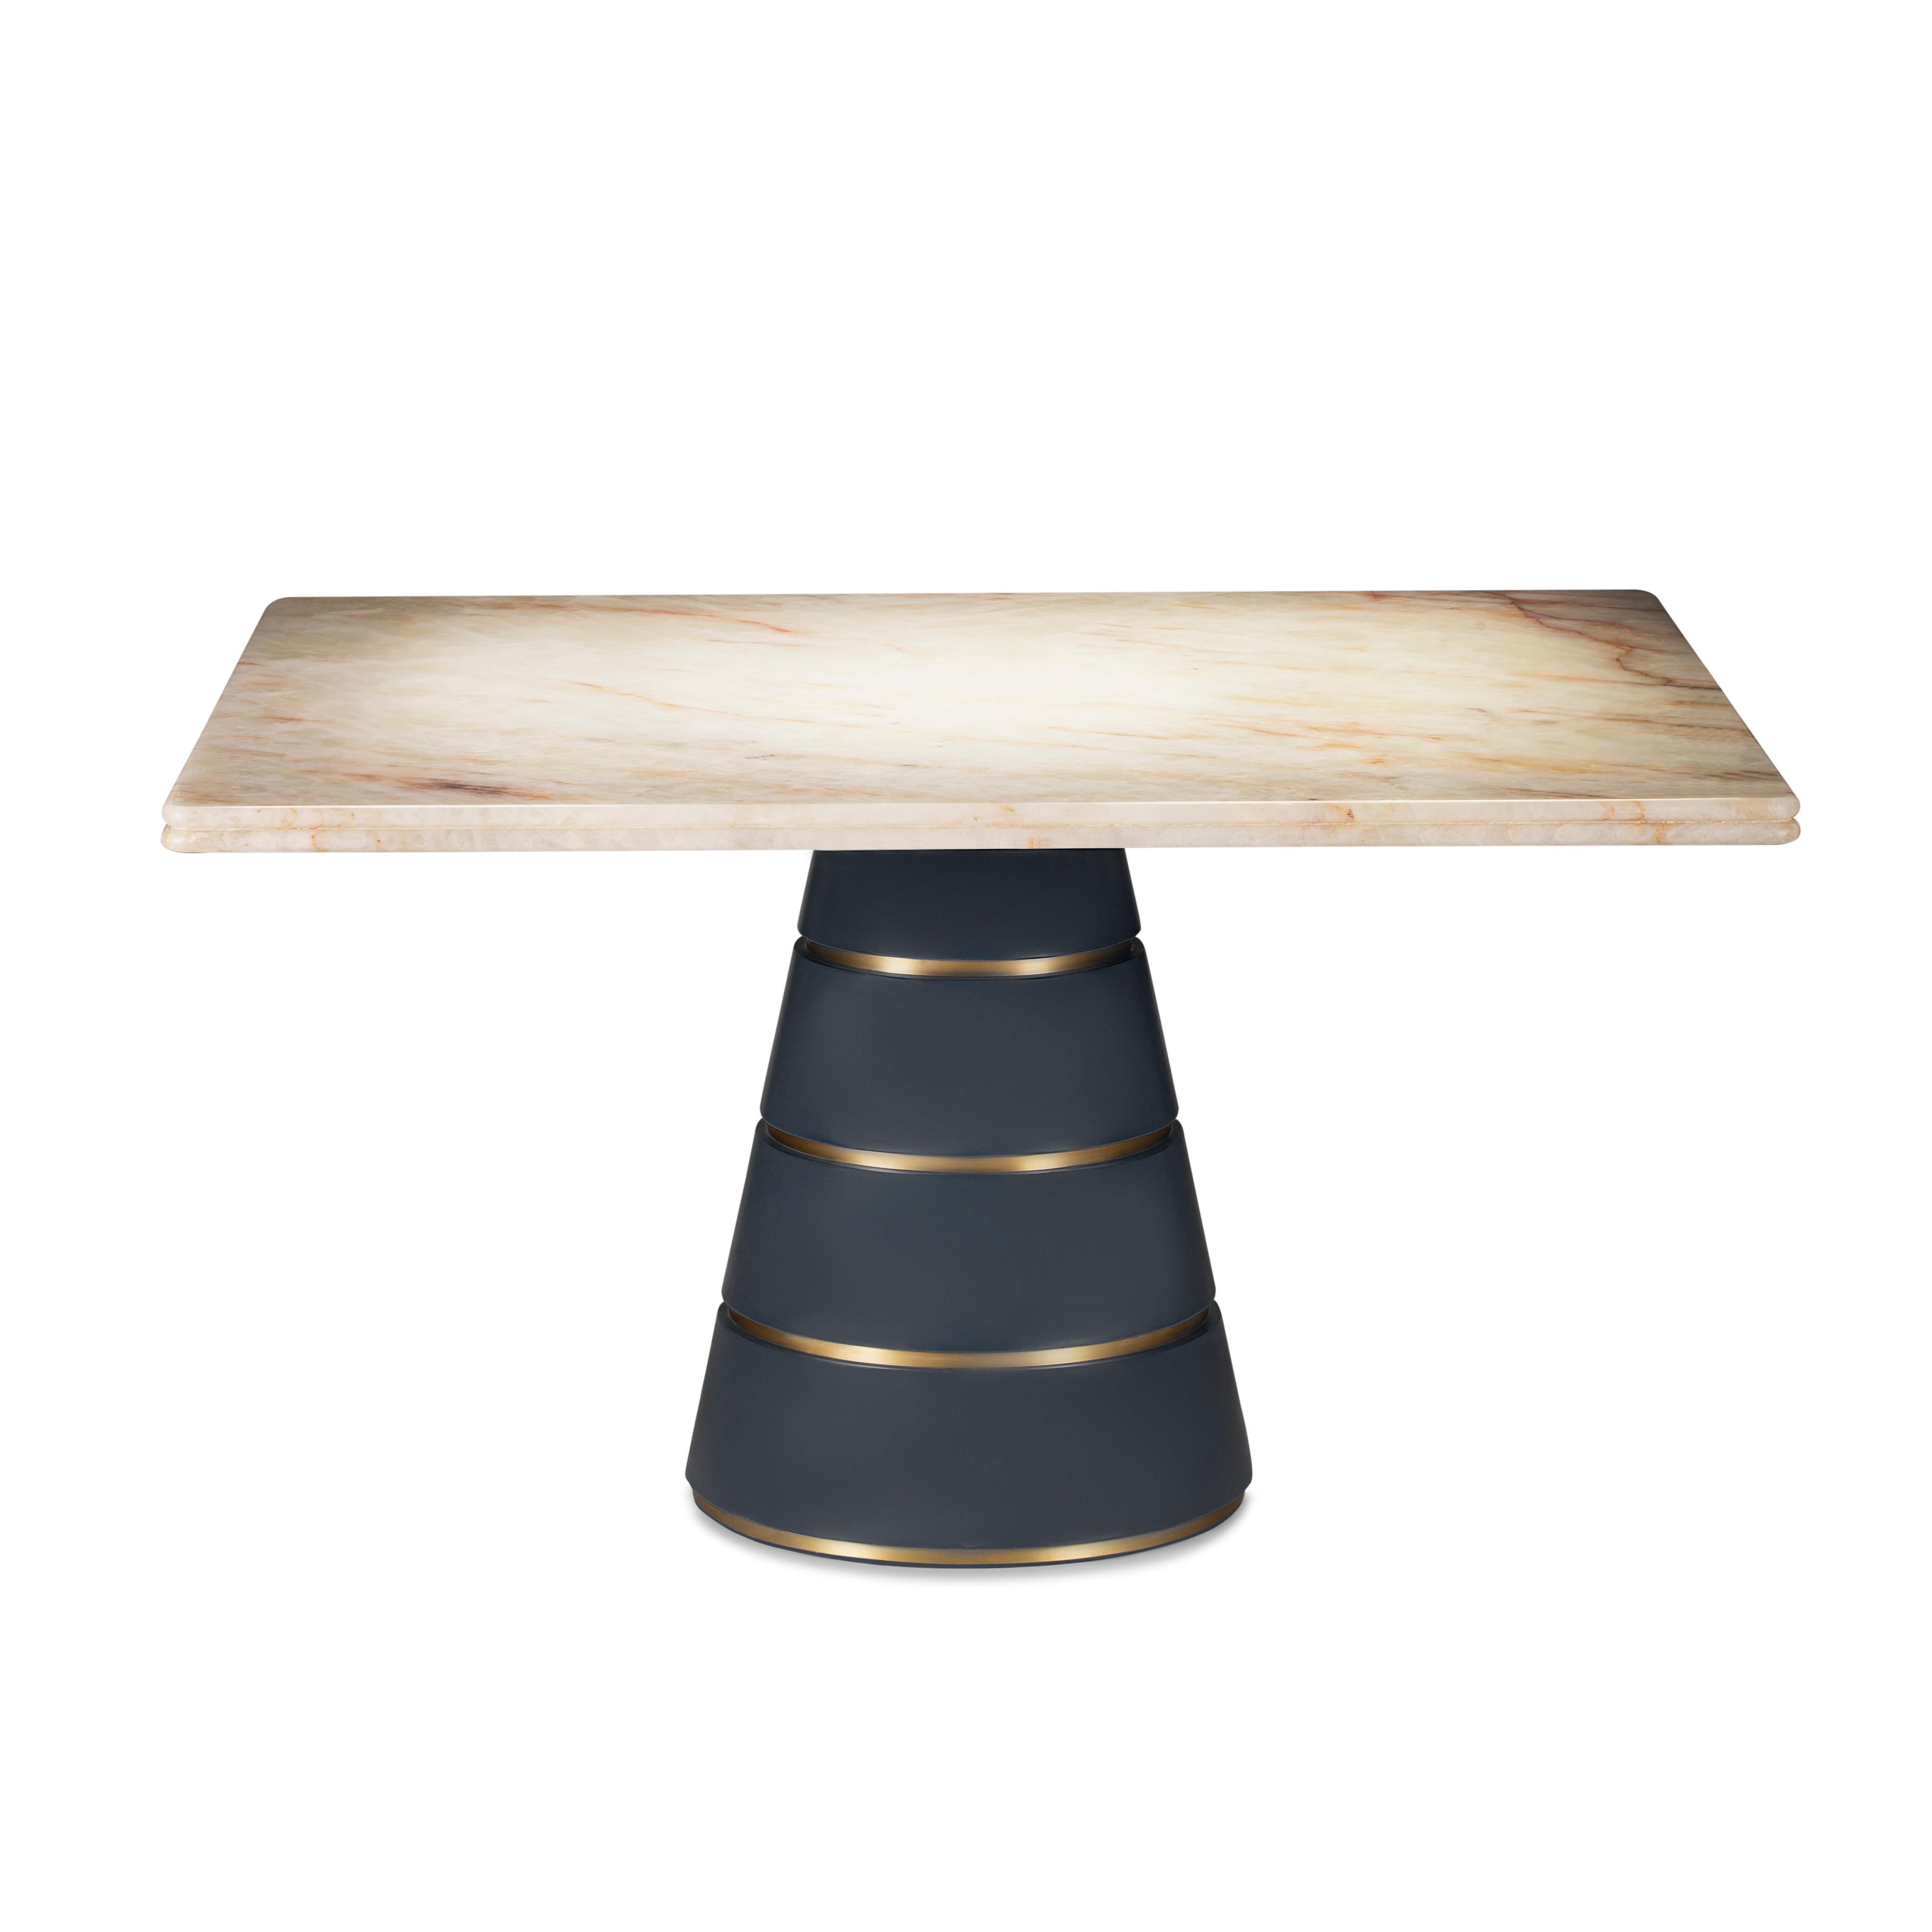 Inspired by the illuminated nighttime atmosphere that characterizes the foothills of the Vesuvio volcano, this striking, evocative dining table will make a distinctive and iconic statement piece in a contemporary interior. The cone-shaped base is